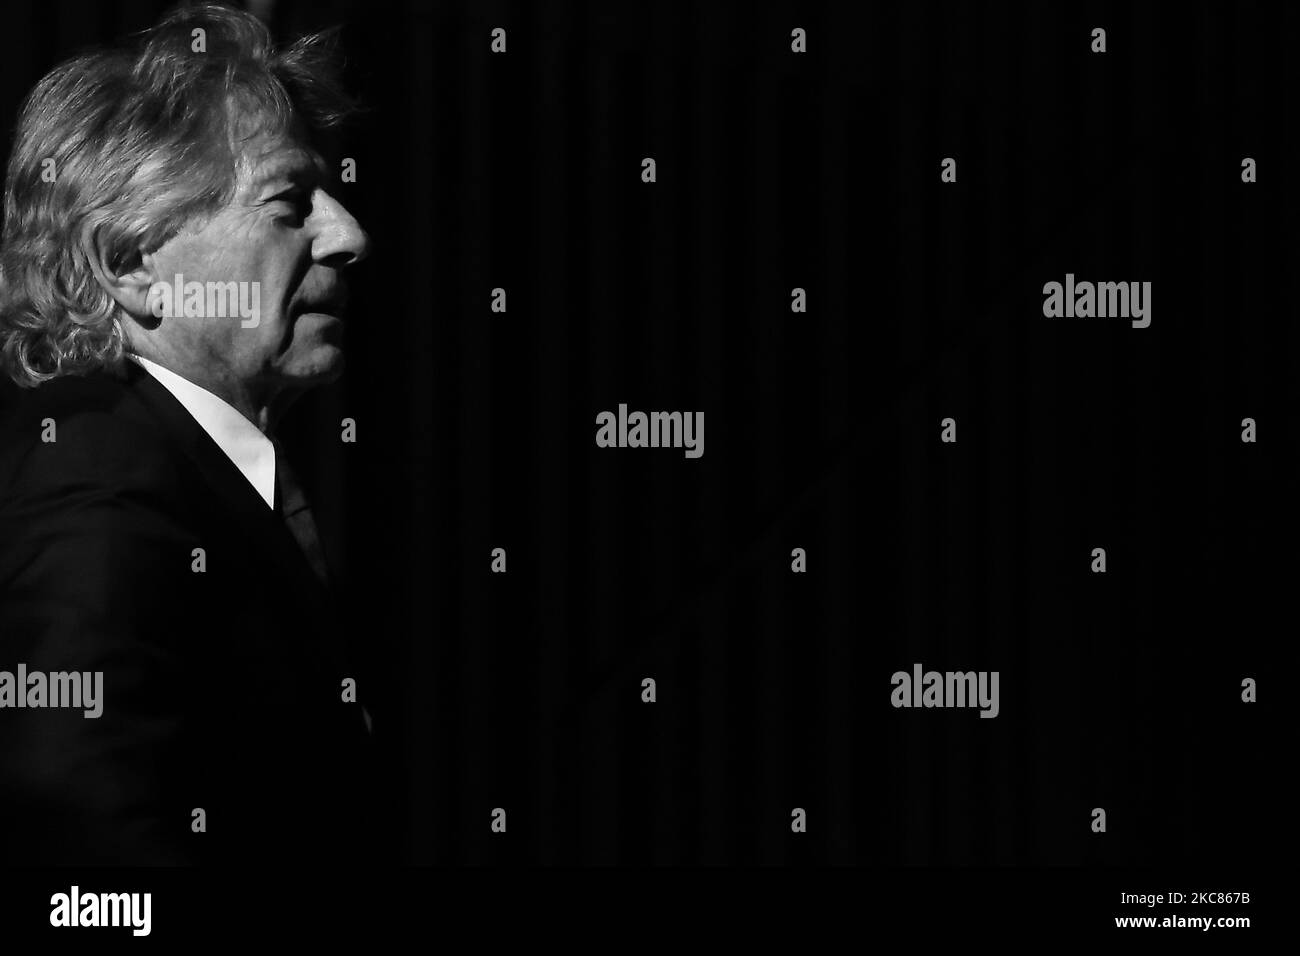 (EDITOR'S NOTE: Image was converted to black and white) Film director Roman Polanski during the concert at the Film Music Festival in Krakow, Poland on May 25, 2016. (Photo by Jakub Porzycki/NurPhoto) Stock Photo